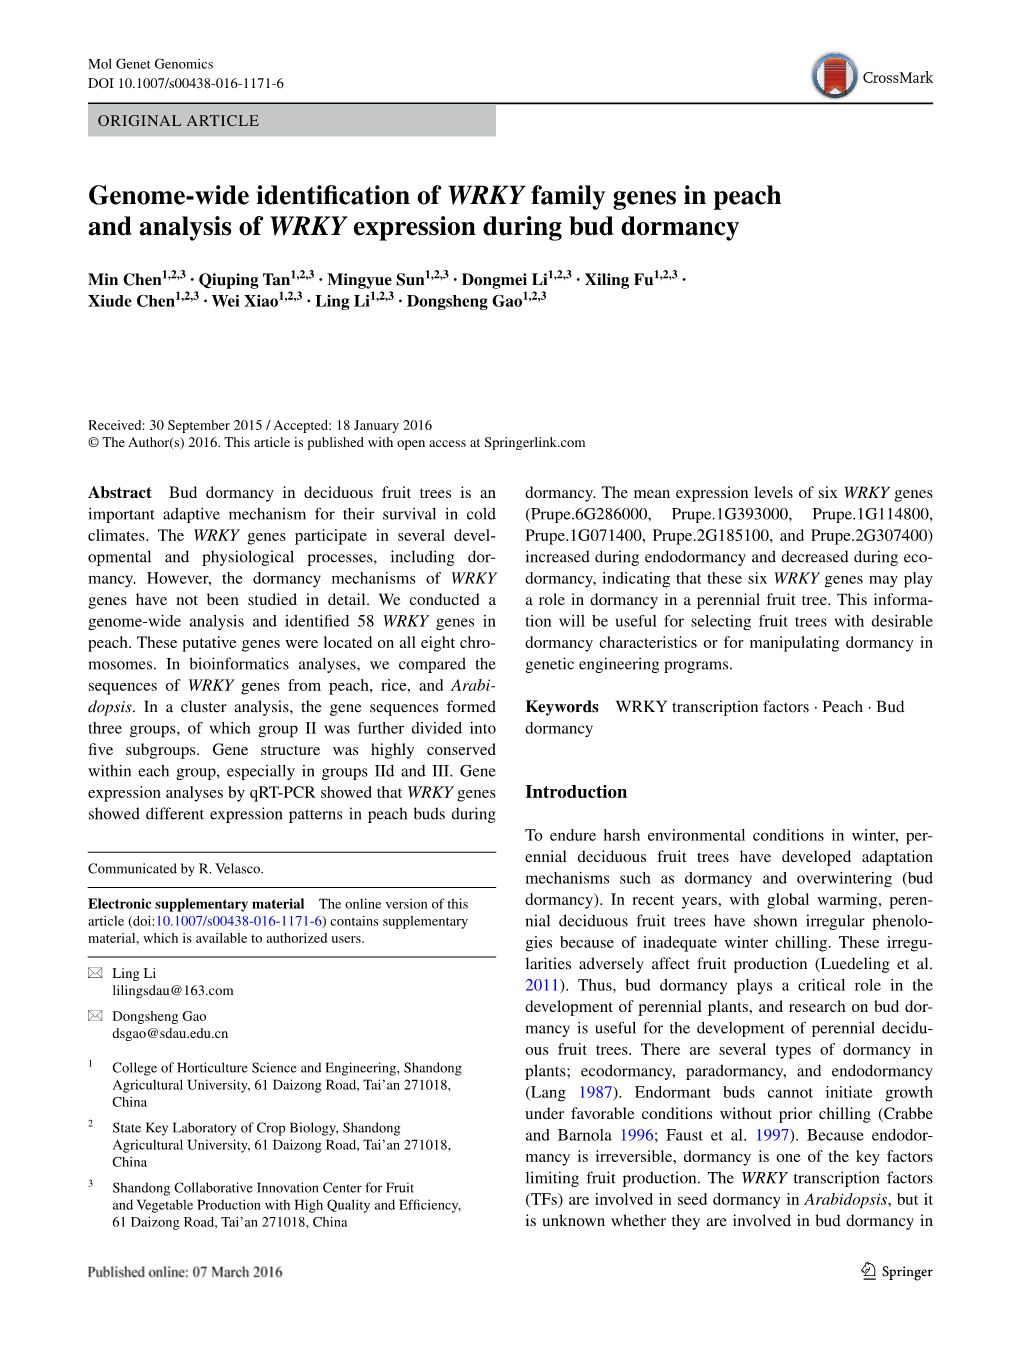 Genome-Wide Identification of WRKY Family Genes in Peach and Analysis